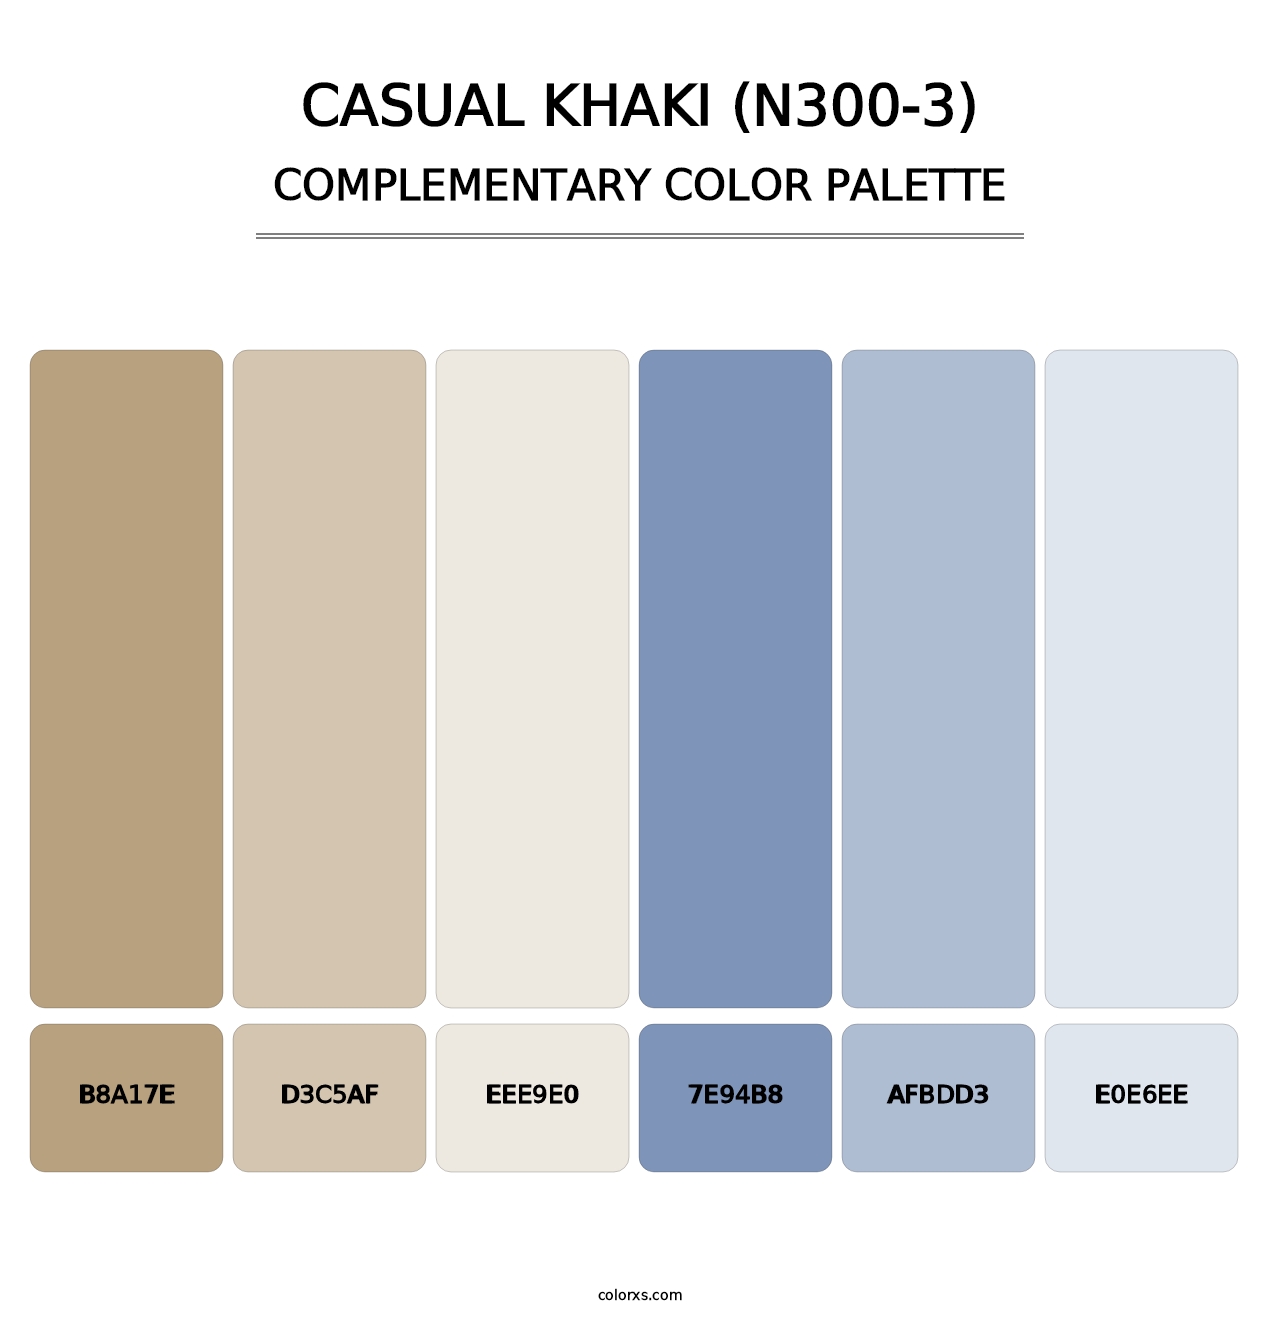 Casual Khaki (N300-3) - Complementary Color Palette